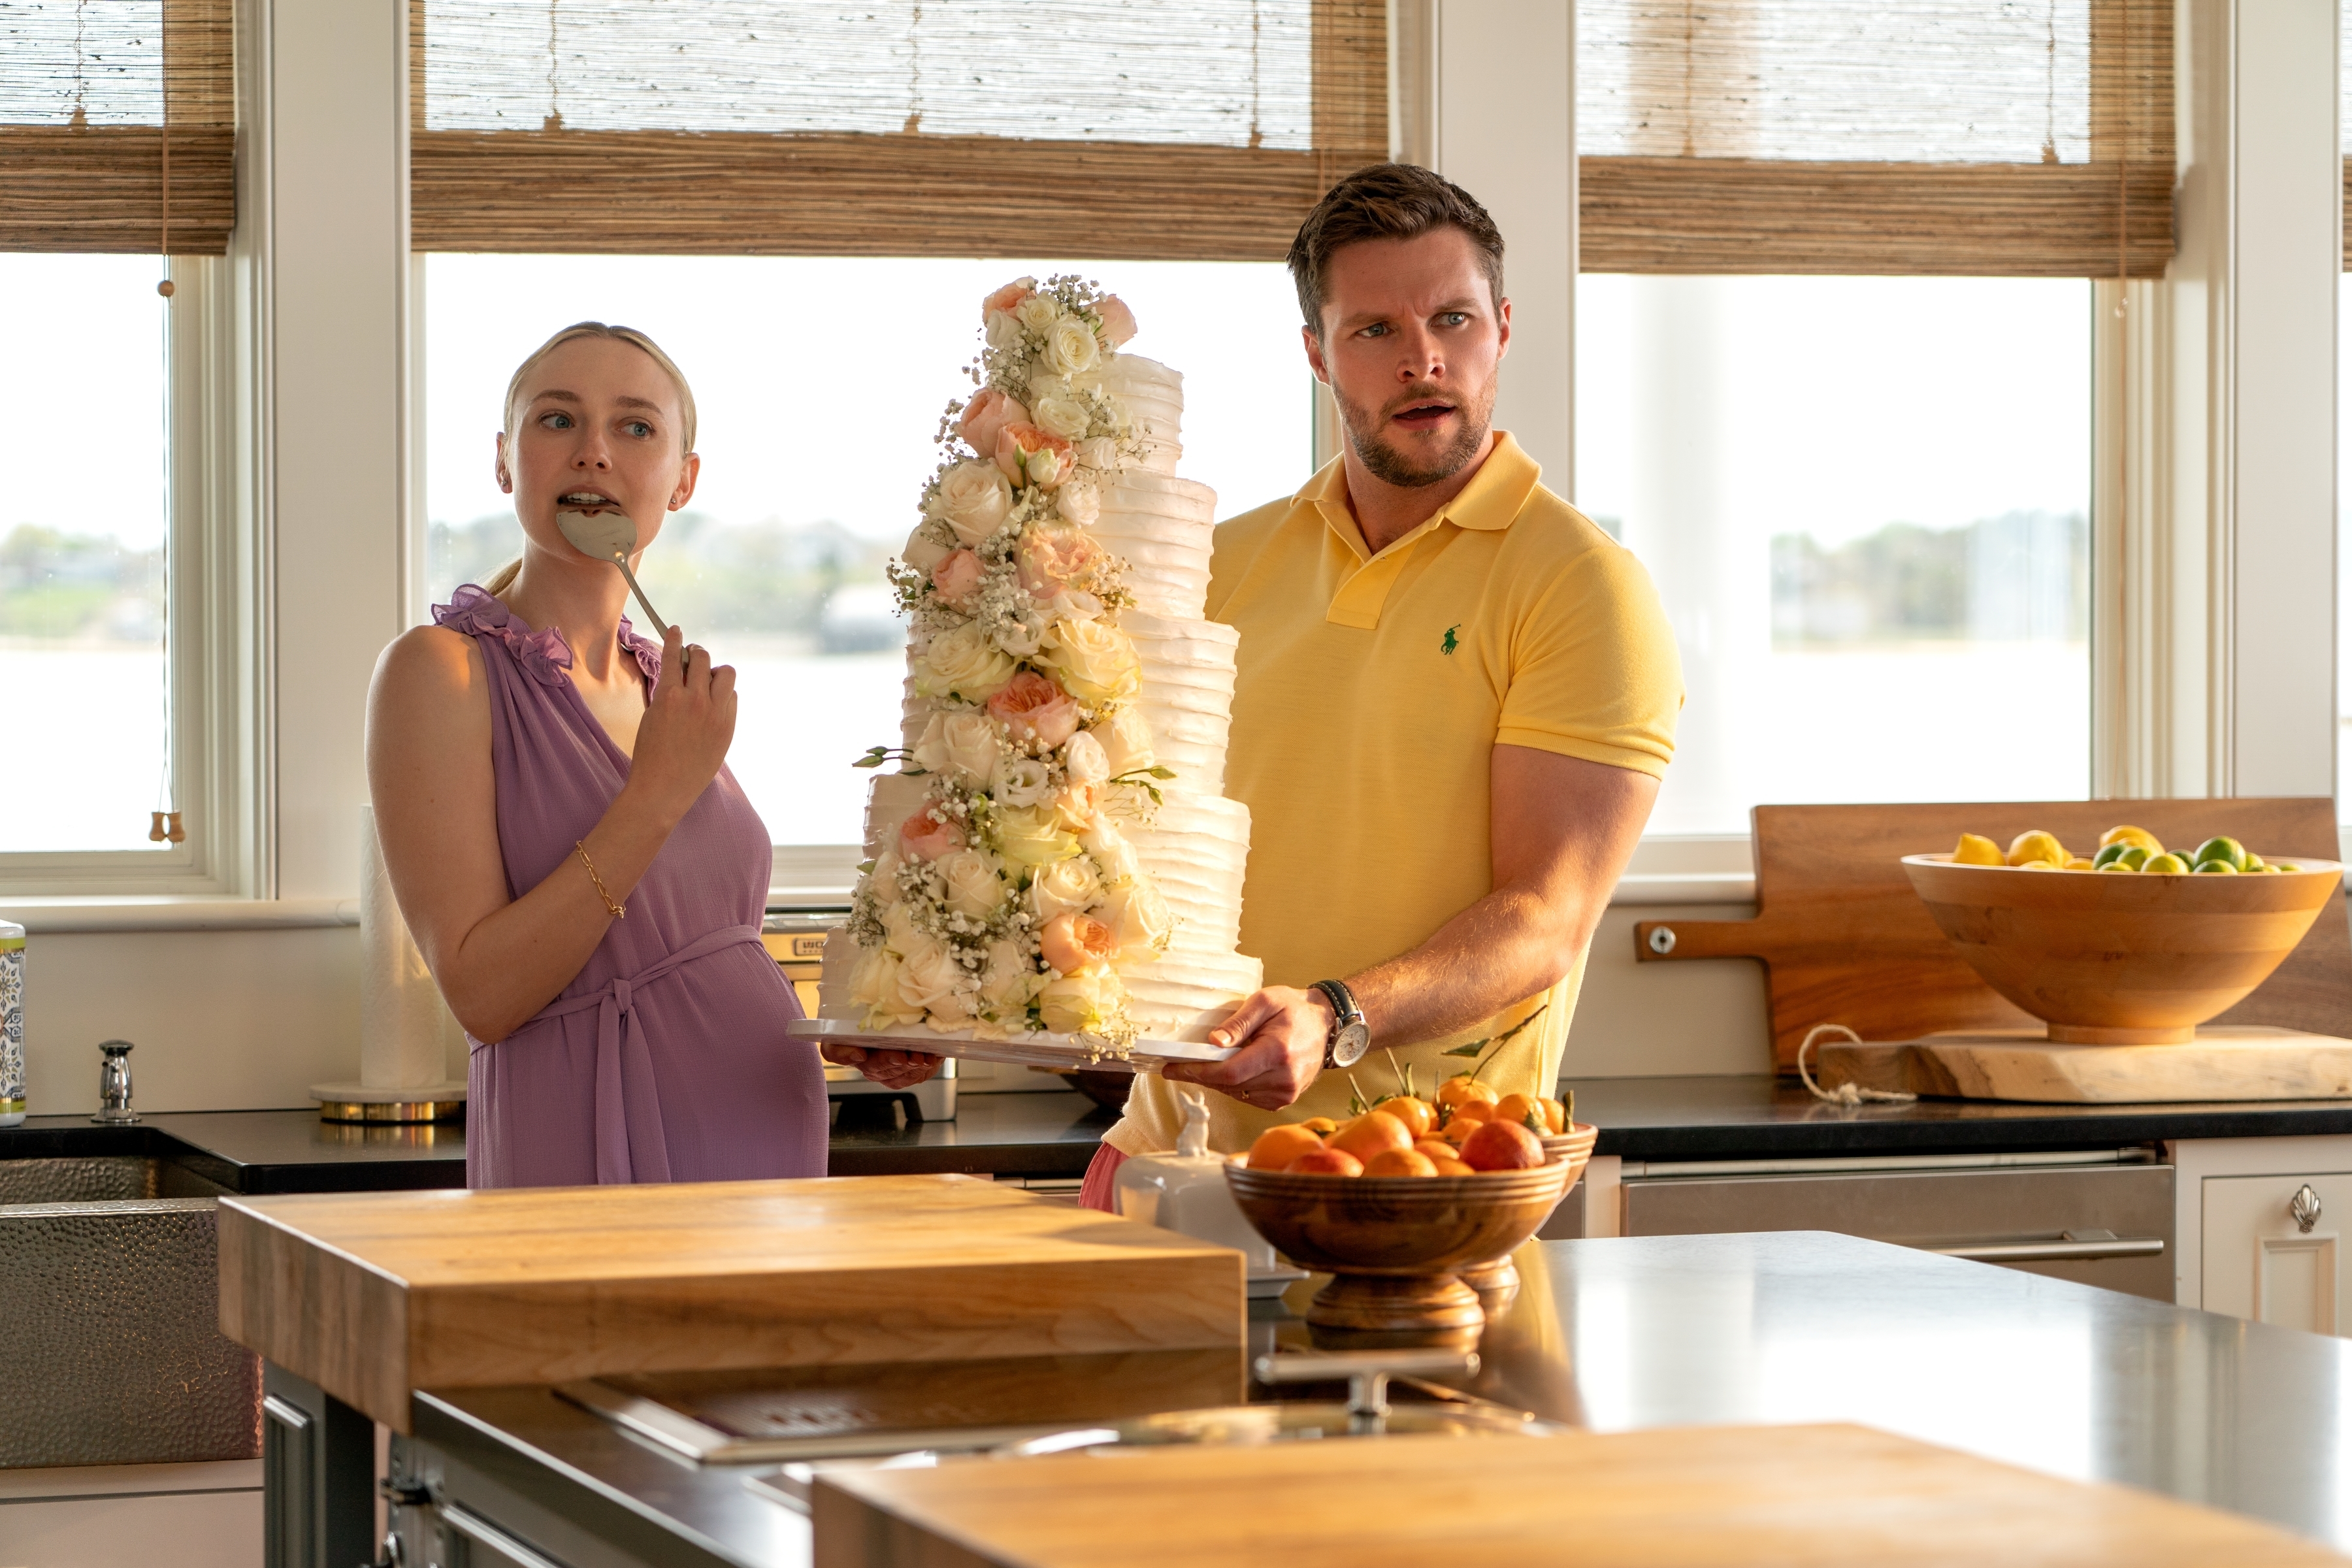 Dakota Fanning wearing a sleeveless dress and Jack Reynor in a polo shirt, holding a tall wedding cake in a kitchen